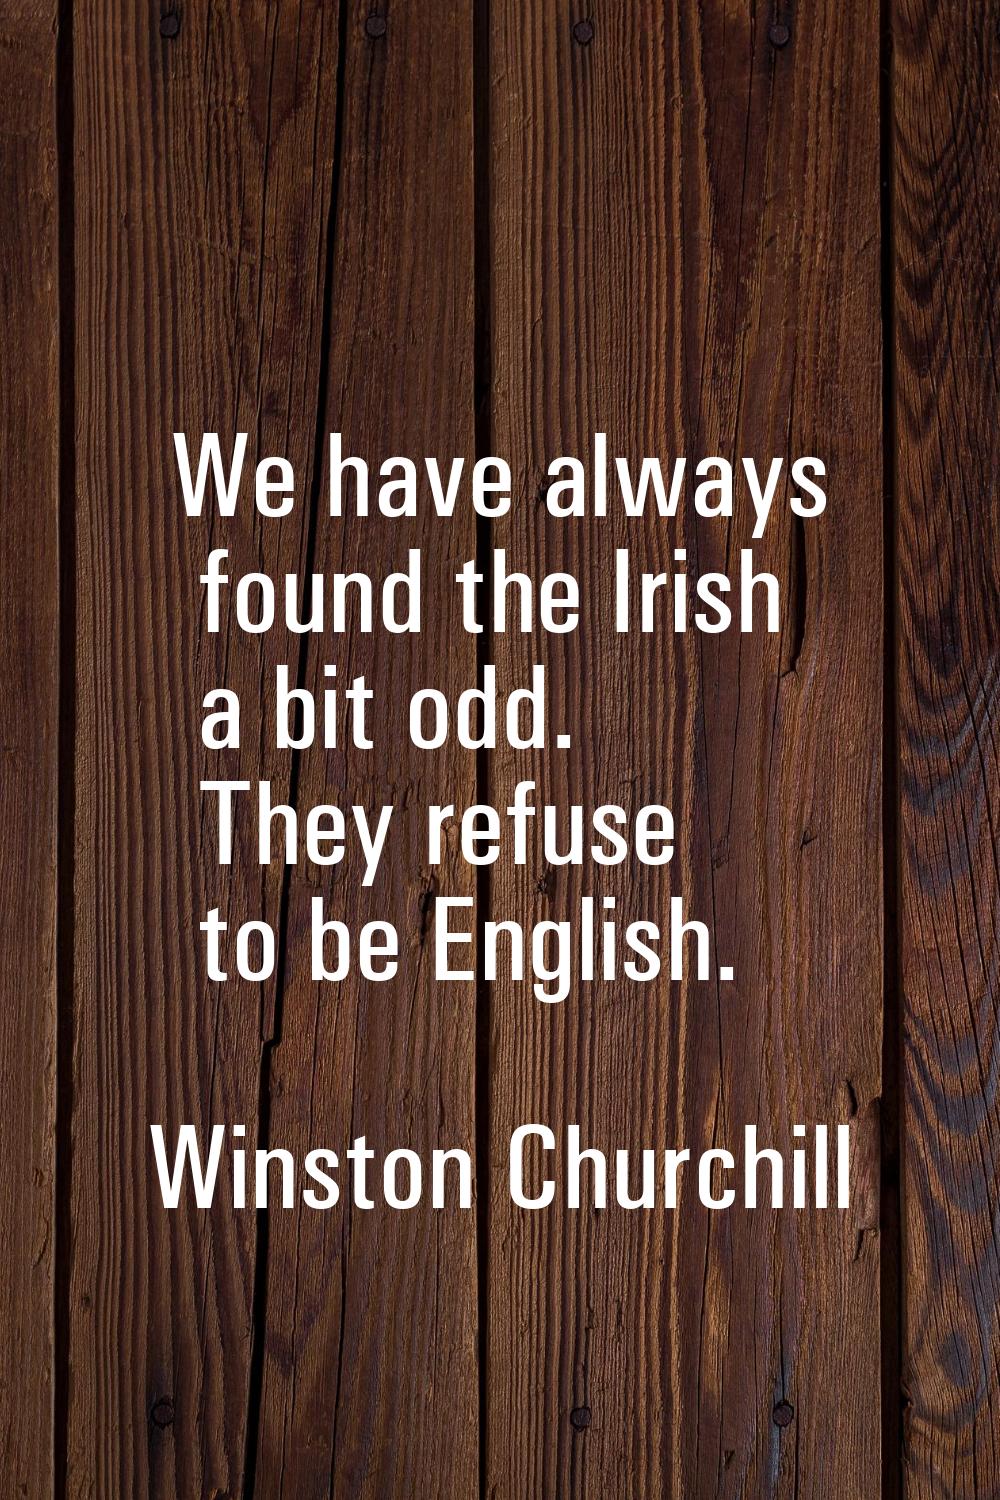 We have always found the Irish a bit odd. They refuse to be English.